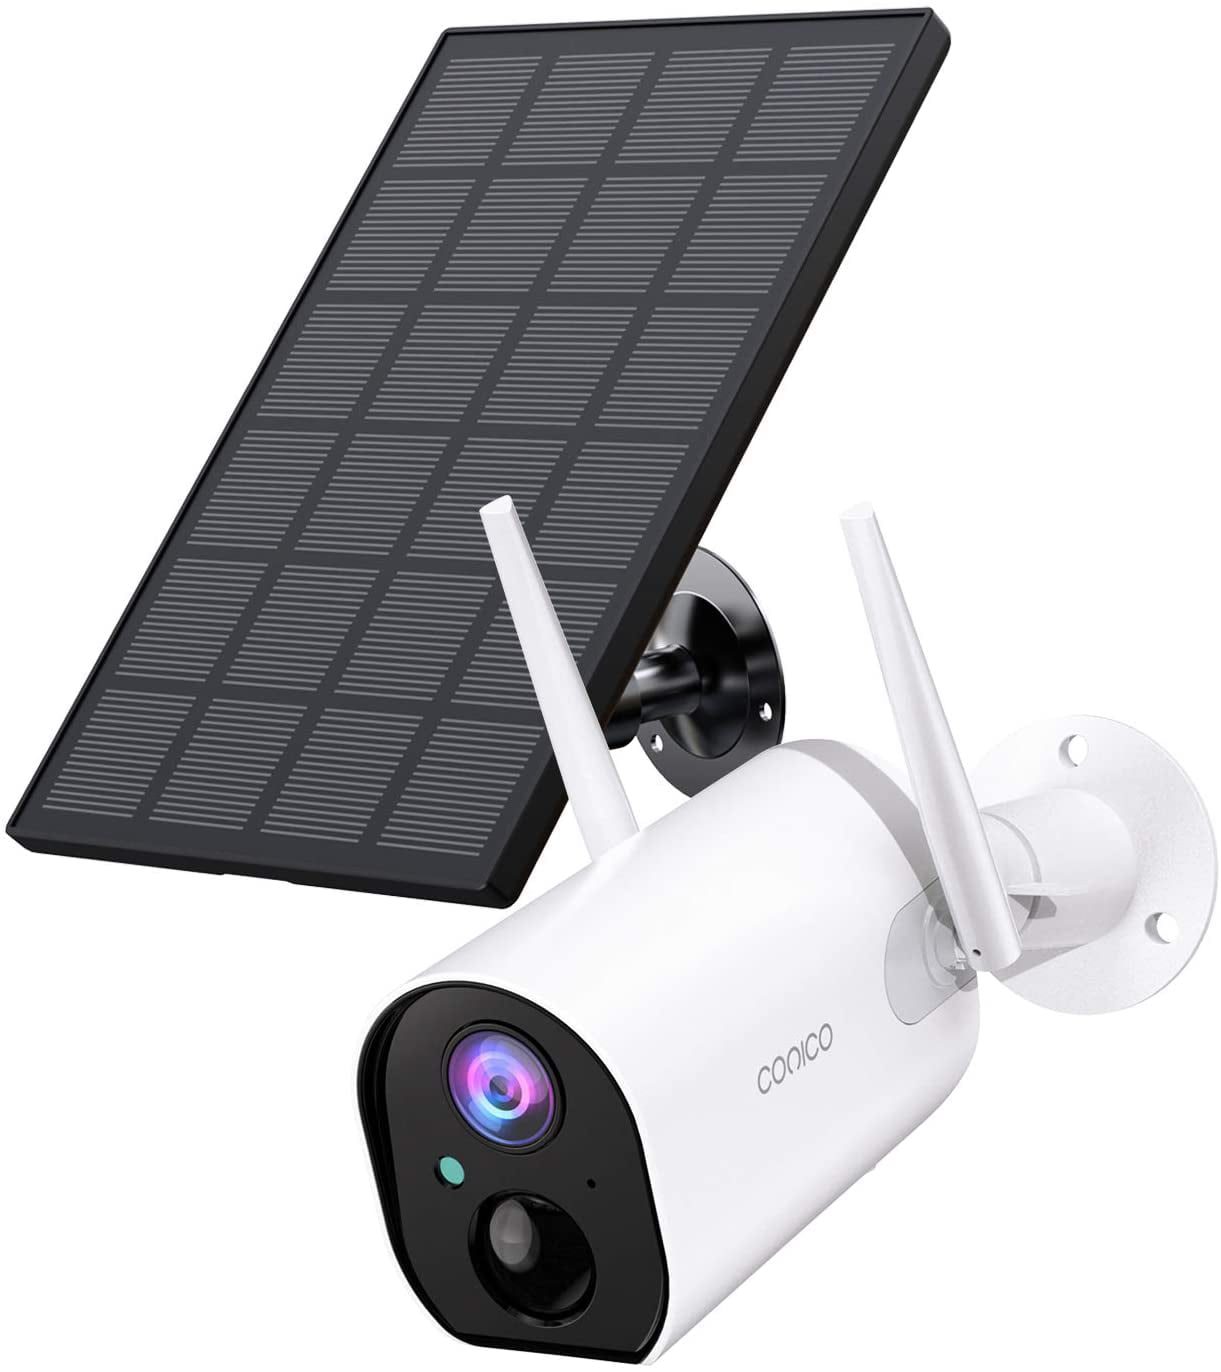 Outdoor Security Camera, Conico Wireless Solar Rechargeable Battery Powered Home IP Camera